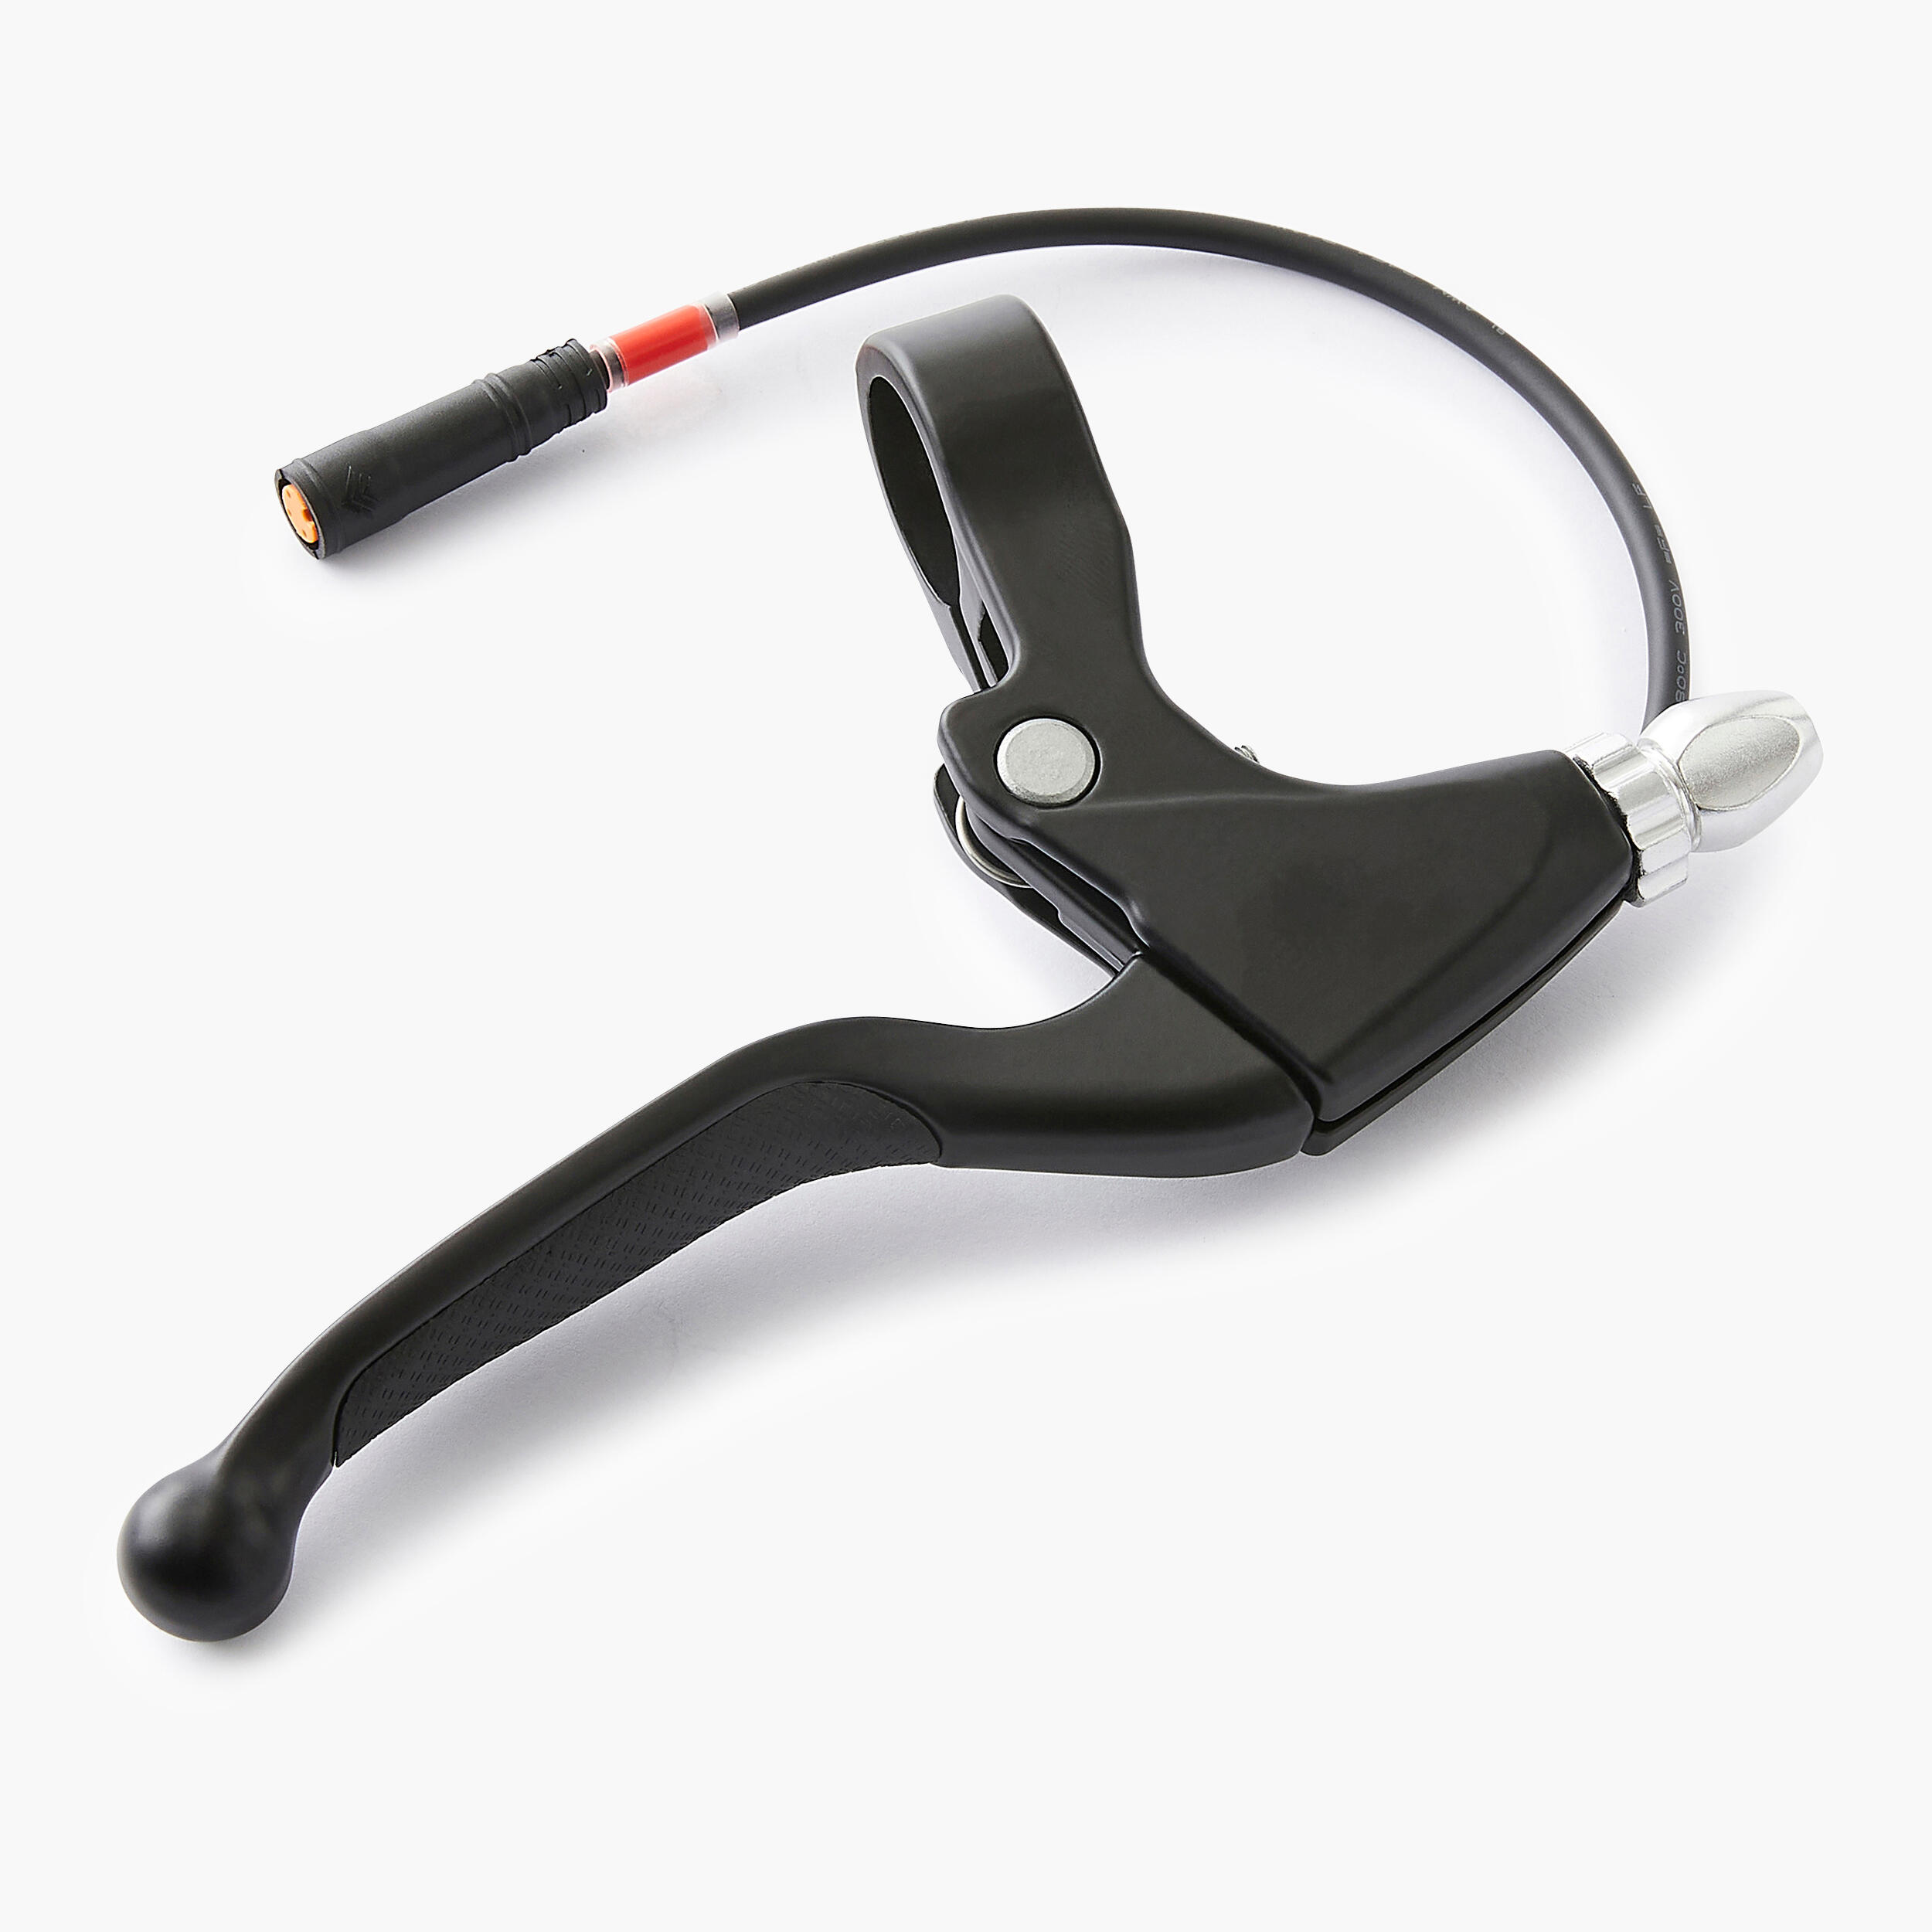 OXELO Brake Lever for the R920E Scooter